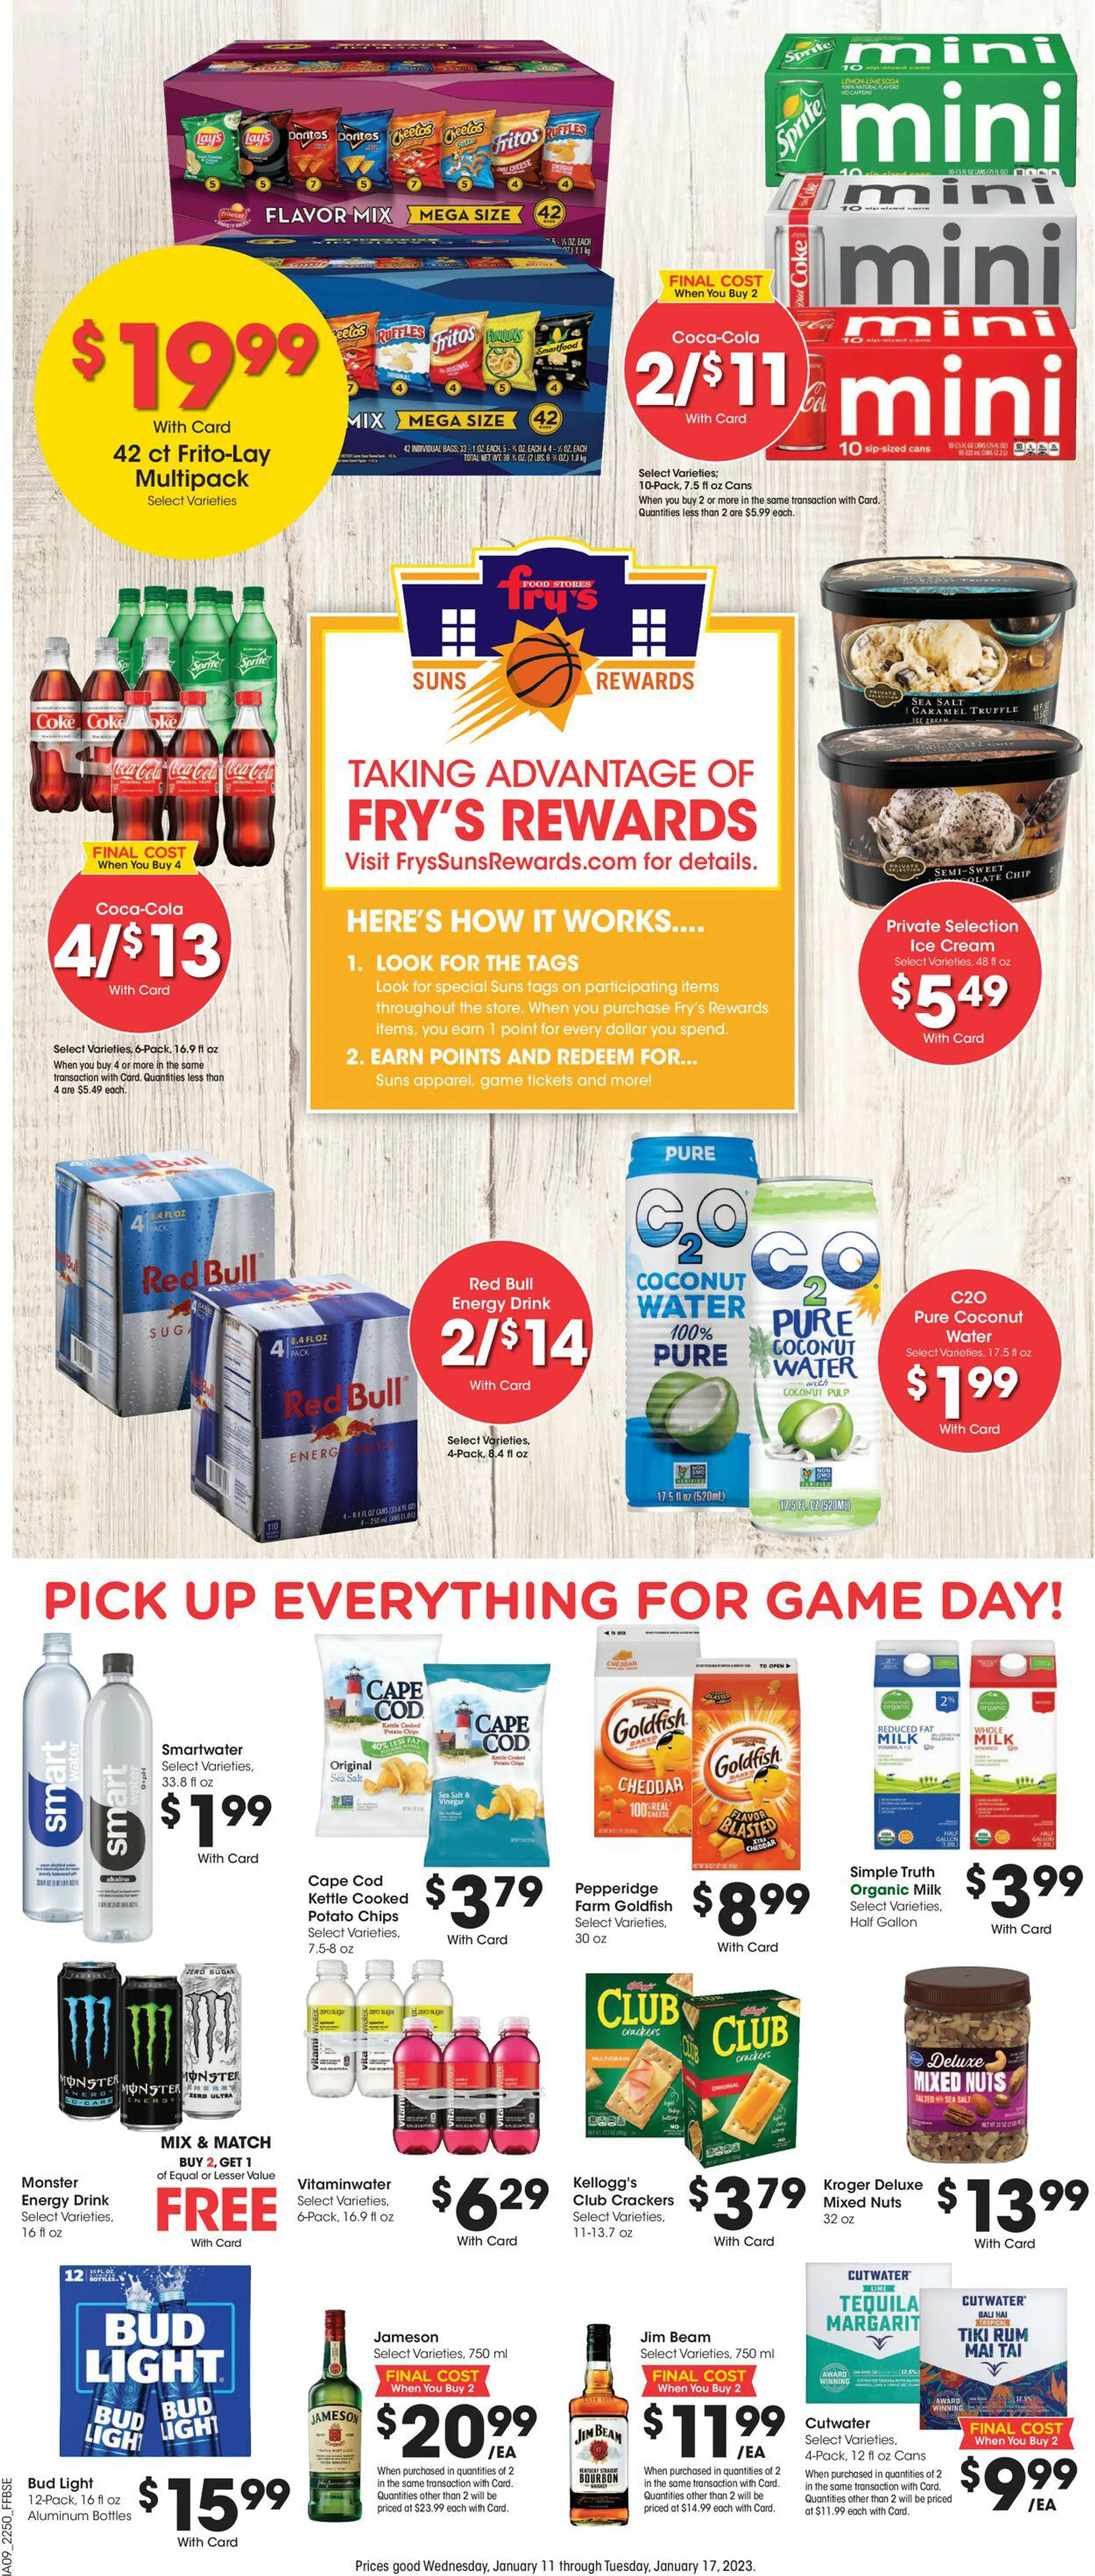 Fry’s Current weekly ad - 14